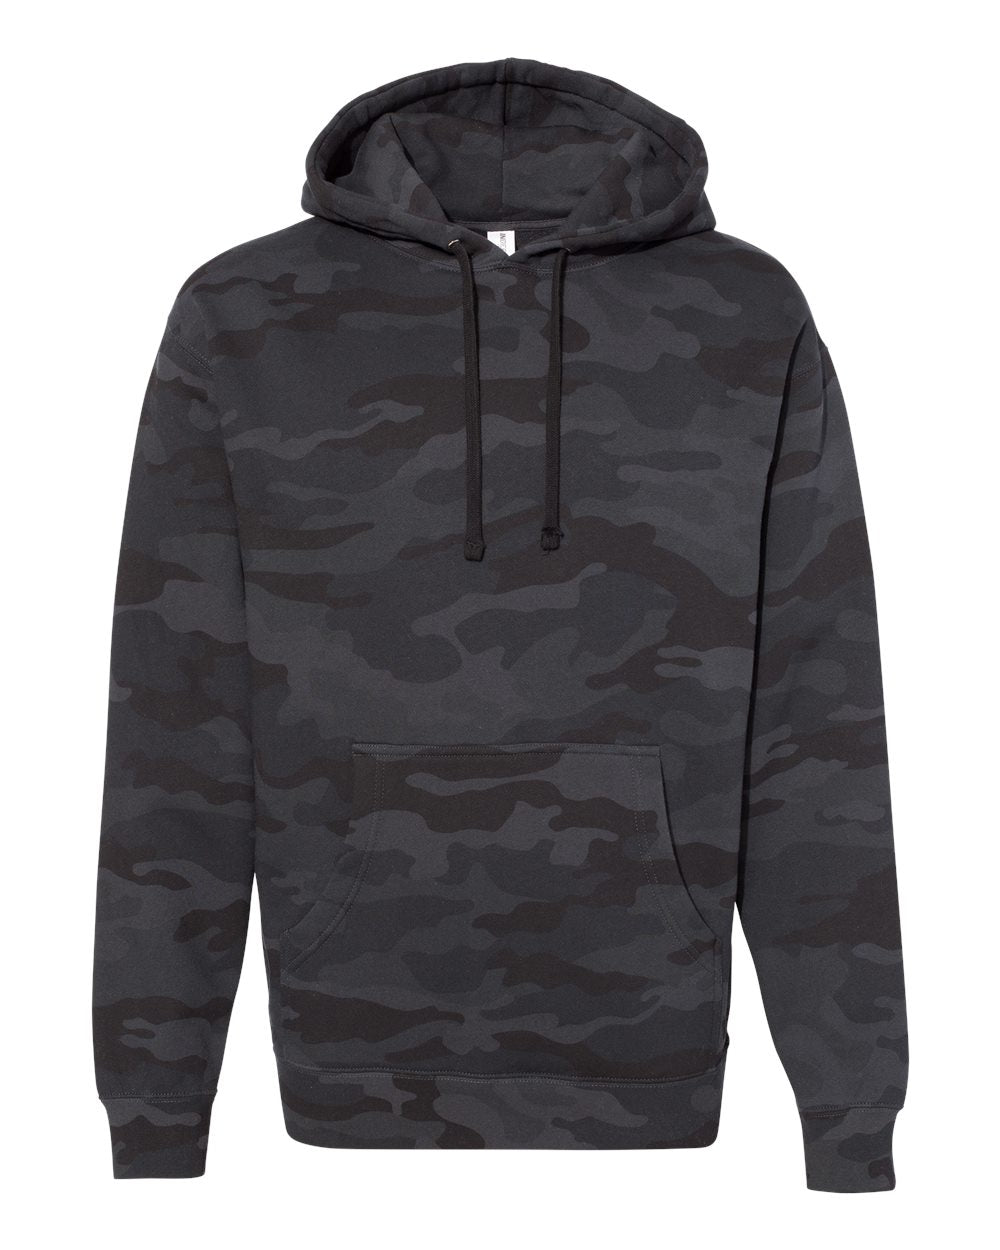 Independent Trading Co. Heavyweight Hooded Sweatshirt IND4000 #color_Black Camo